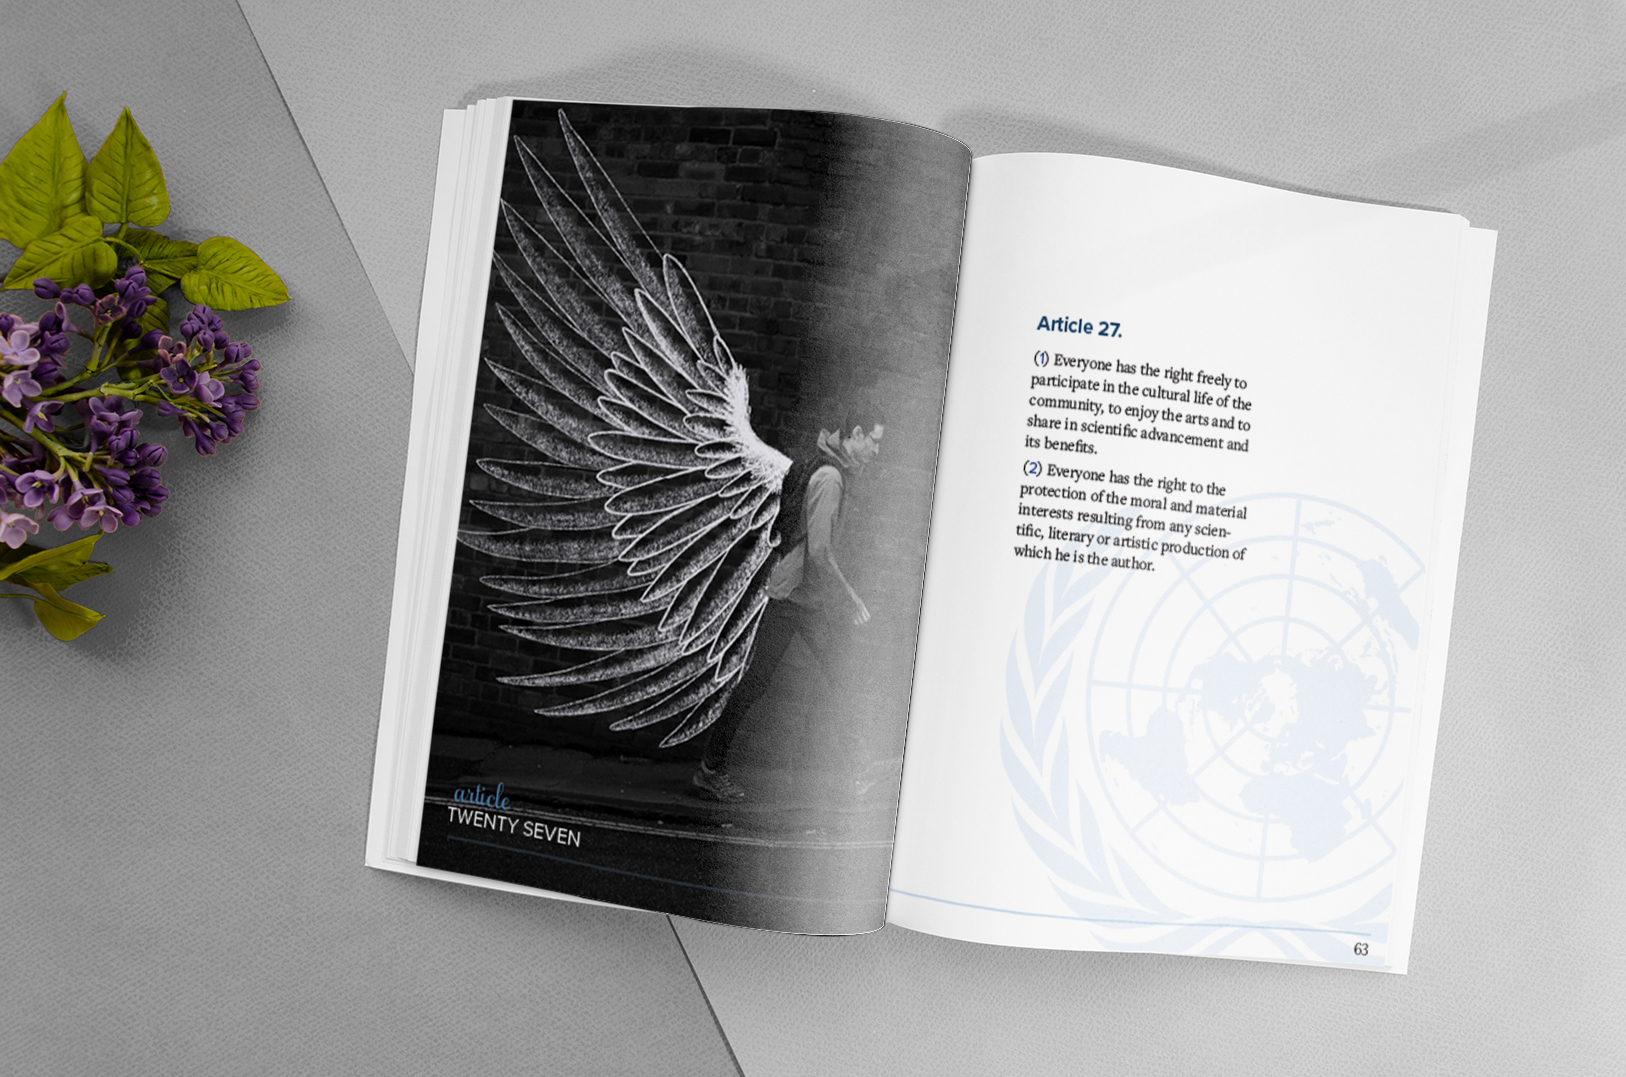 The UN booklet open to a spread showing text from article 27, and a man walking with graffiti wings drawn on.